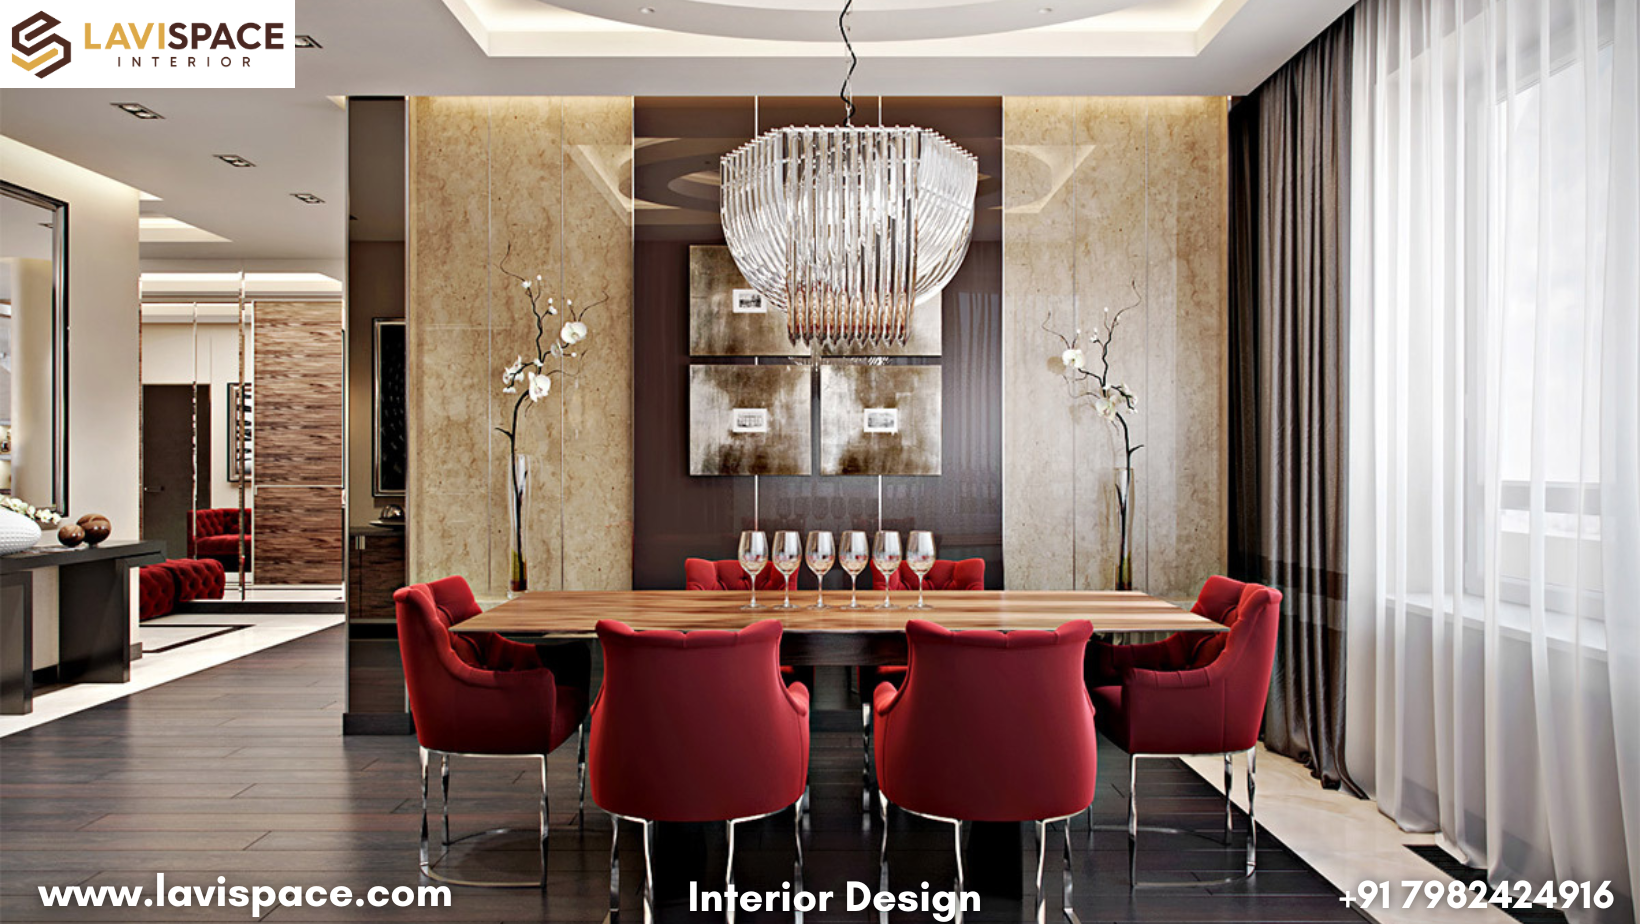 Our sleek modern dining room, Where style meets maintenance